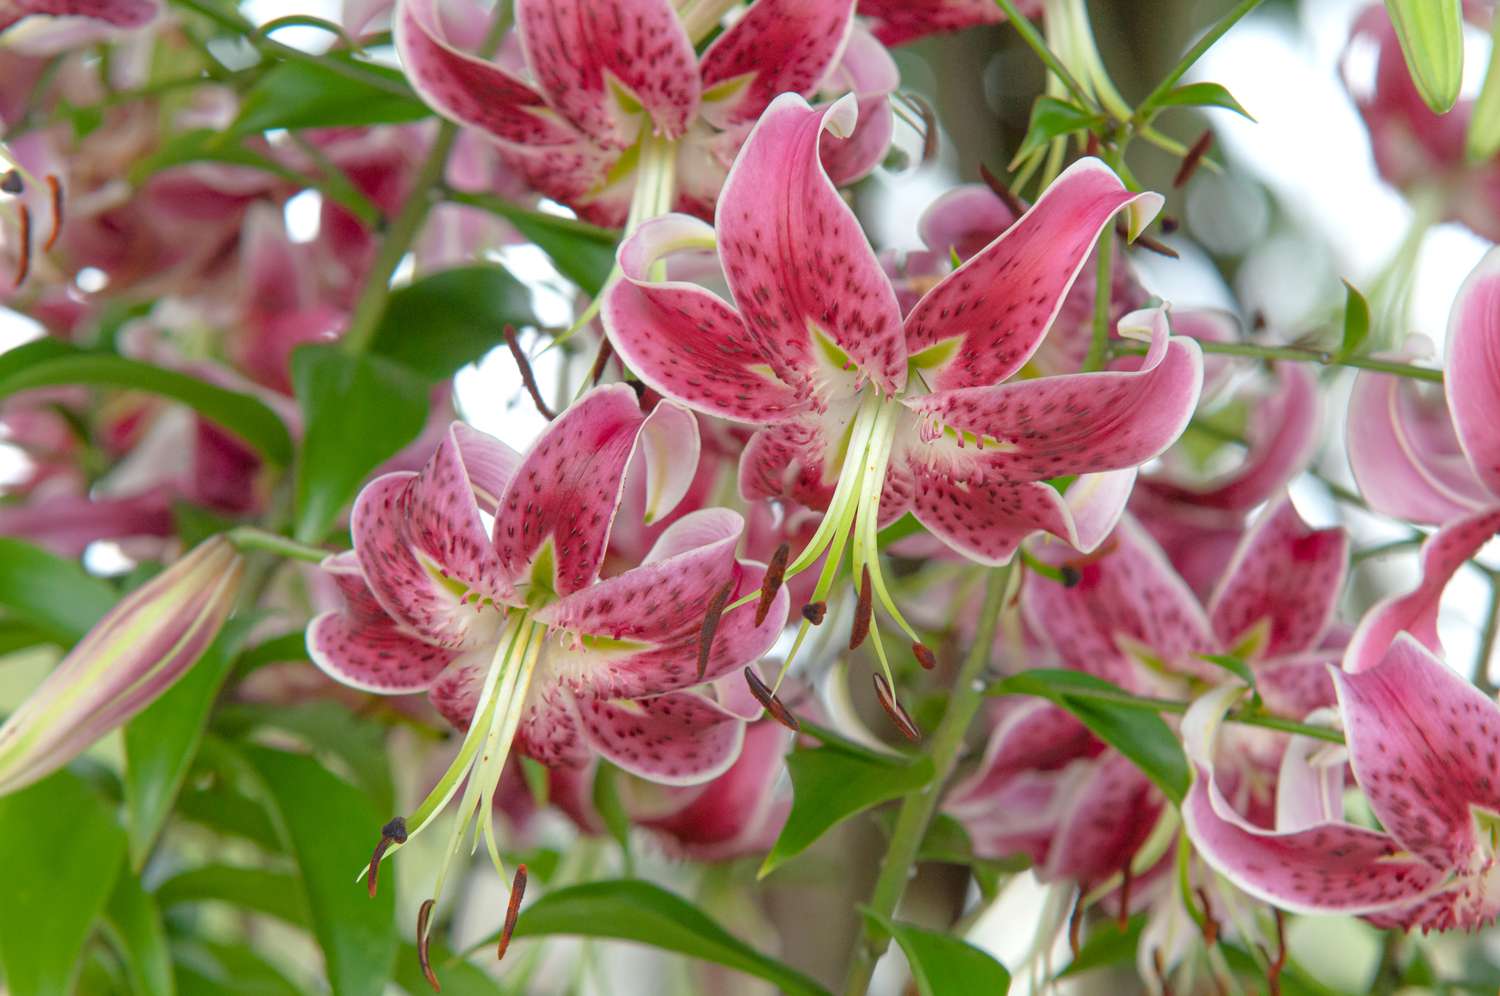 'Scarlet Delight' lily flower with pink spotted petals and light green stamen in the middle